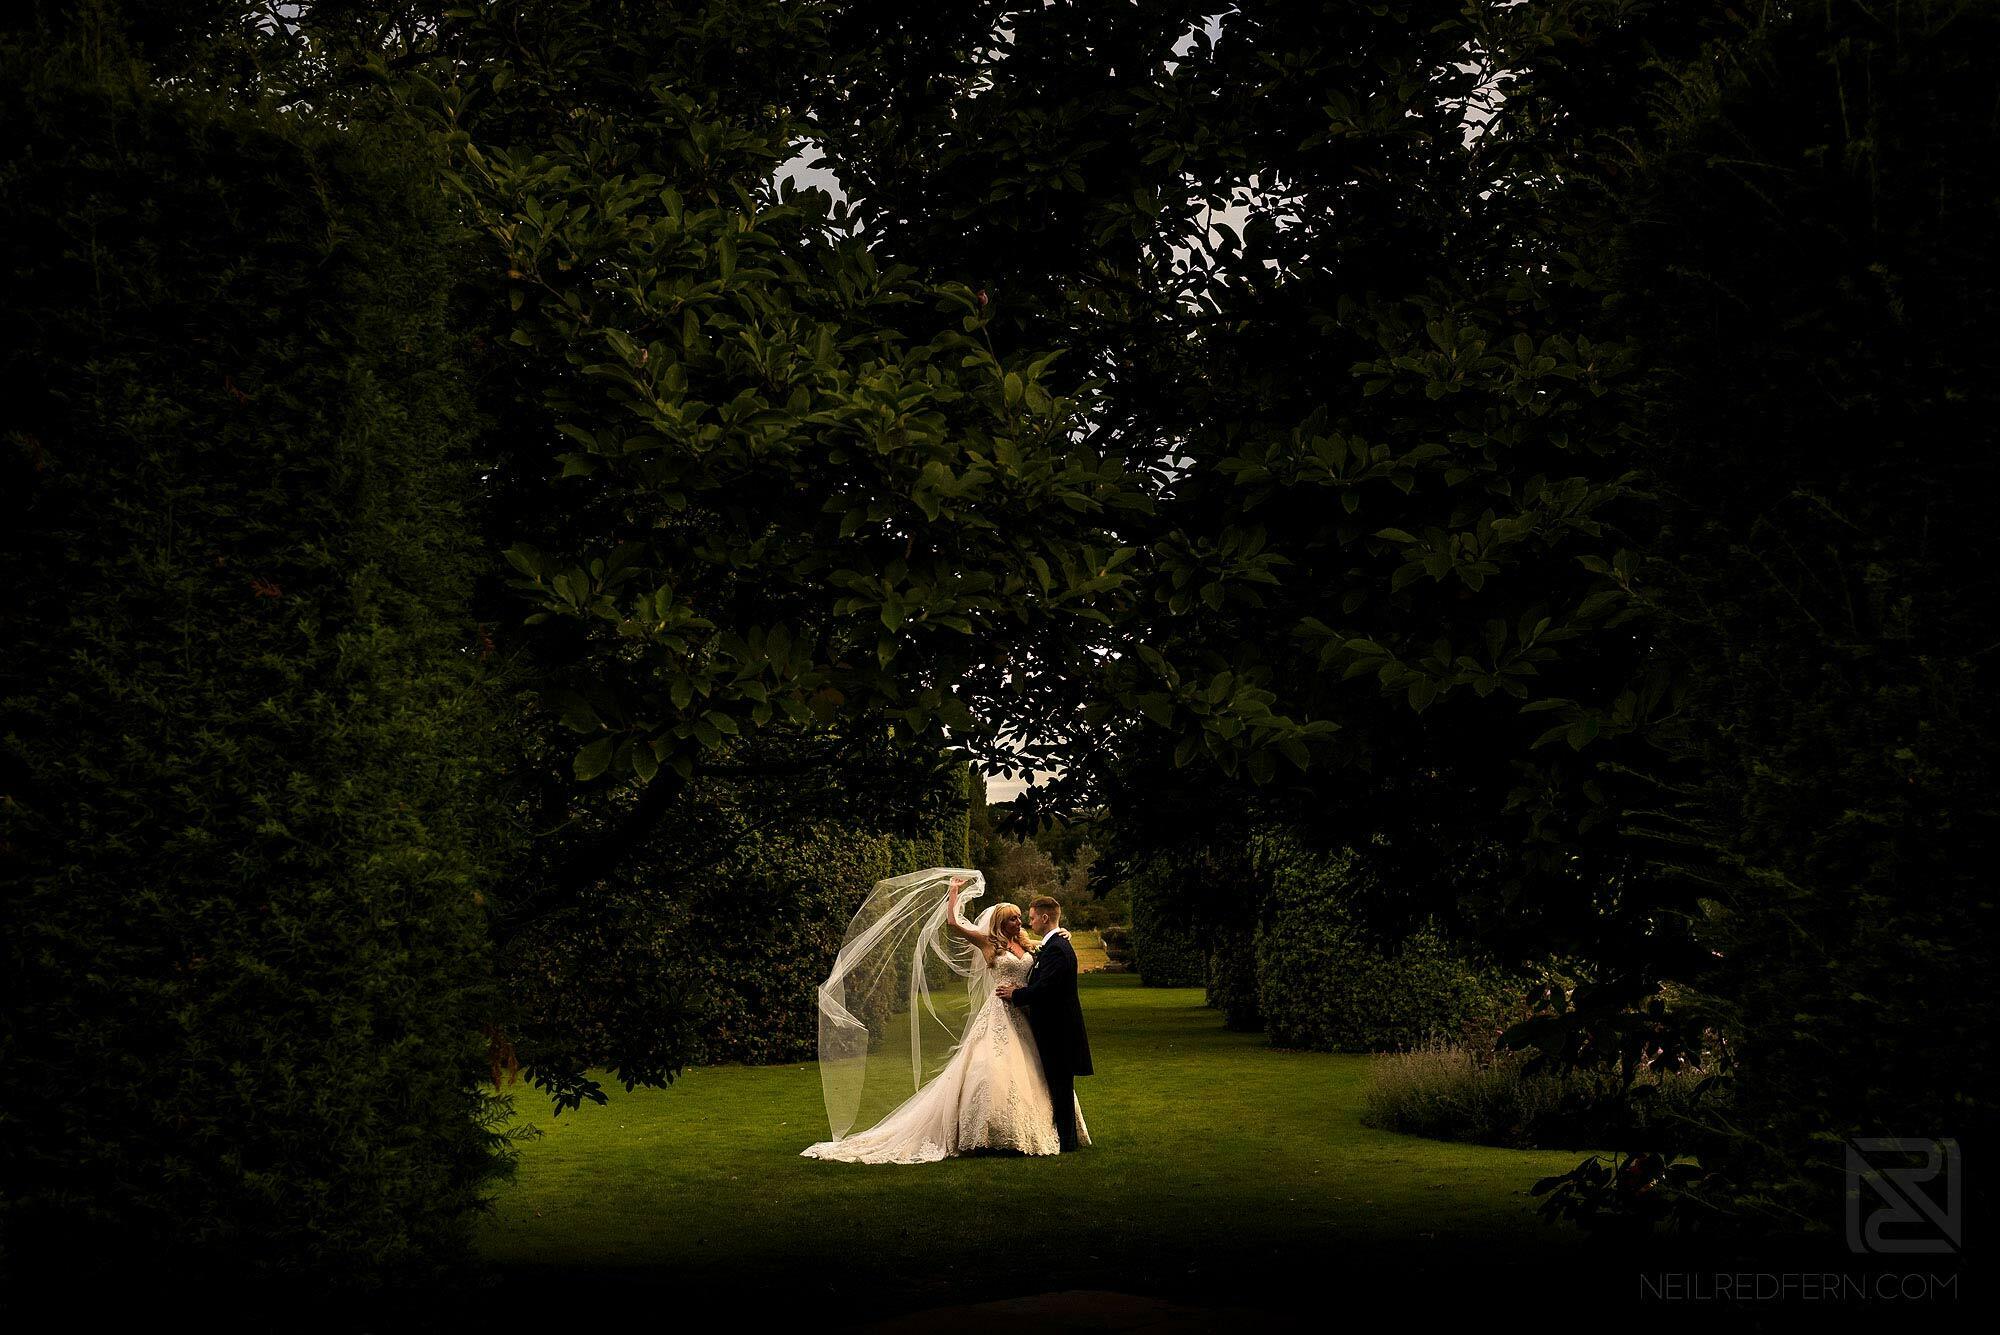 dramatic photograph of bride and groom with veil blowing in wind